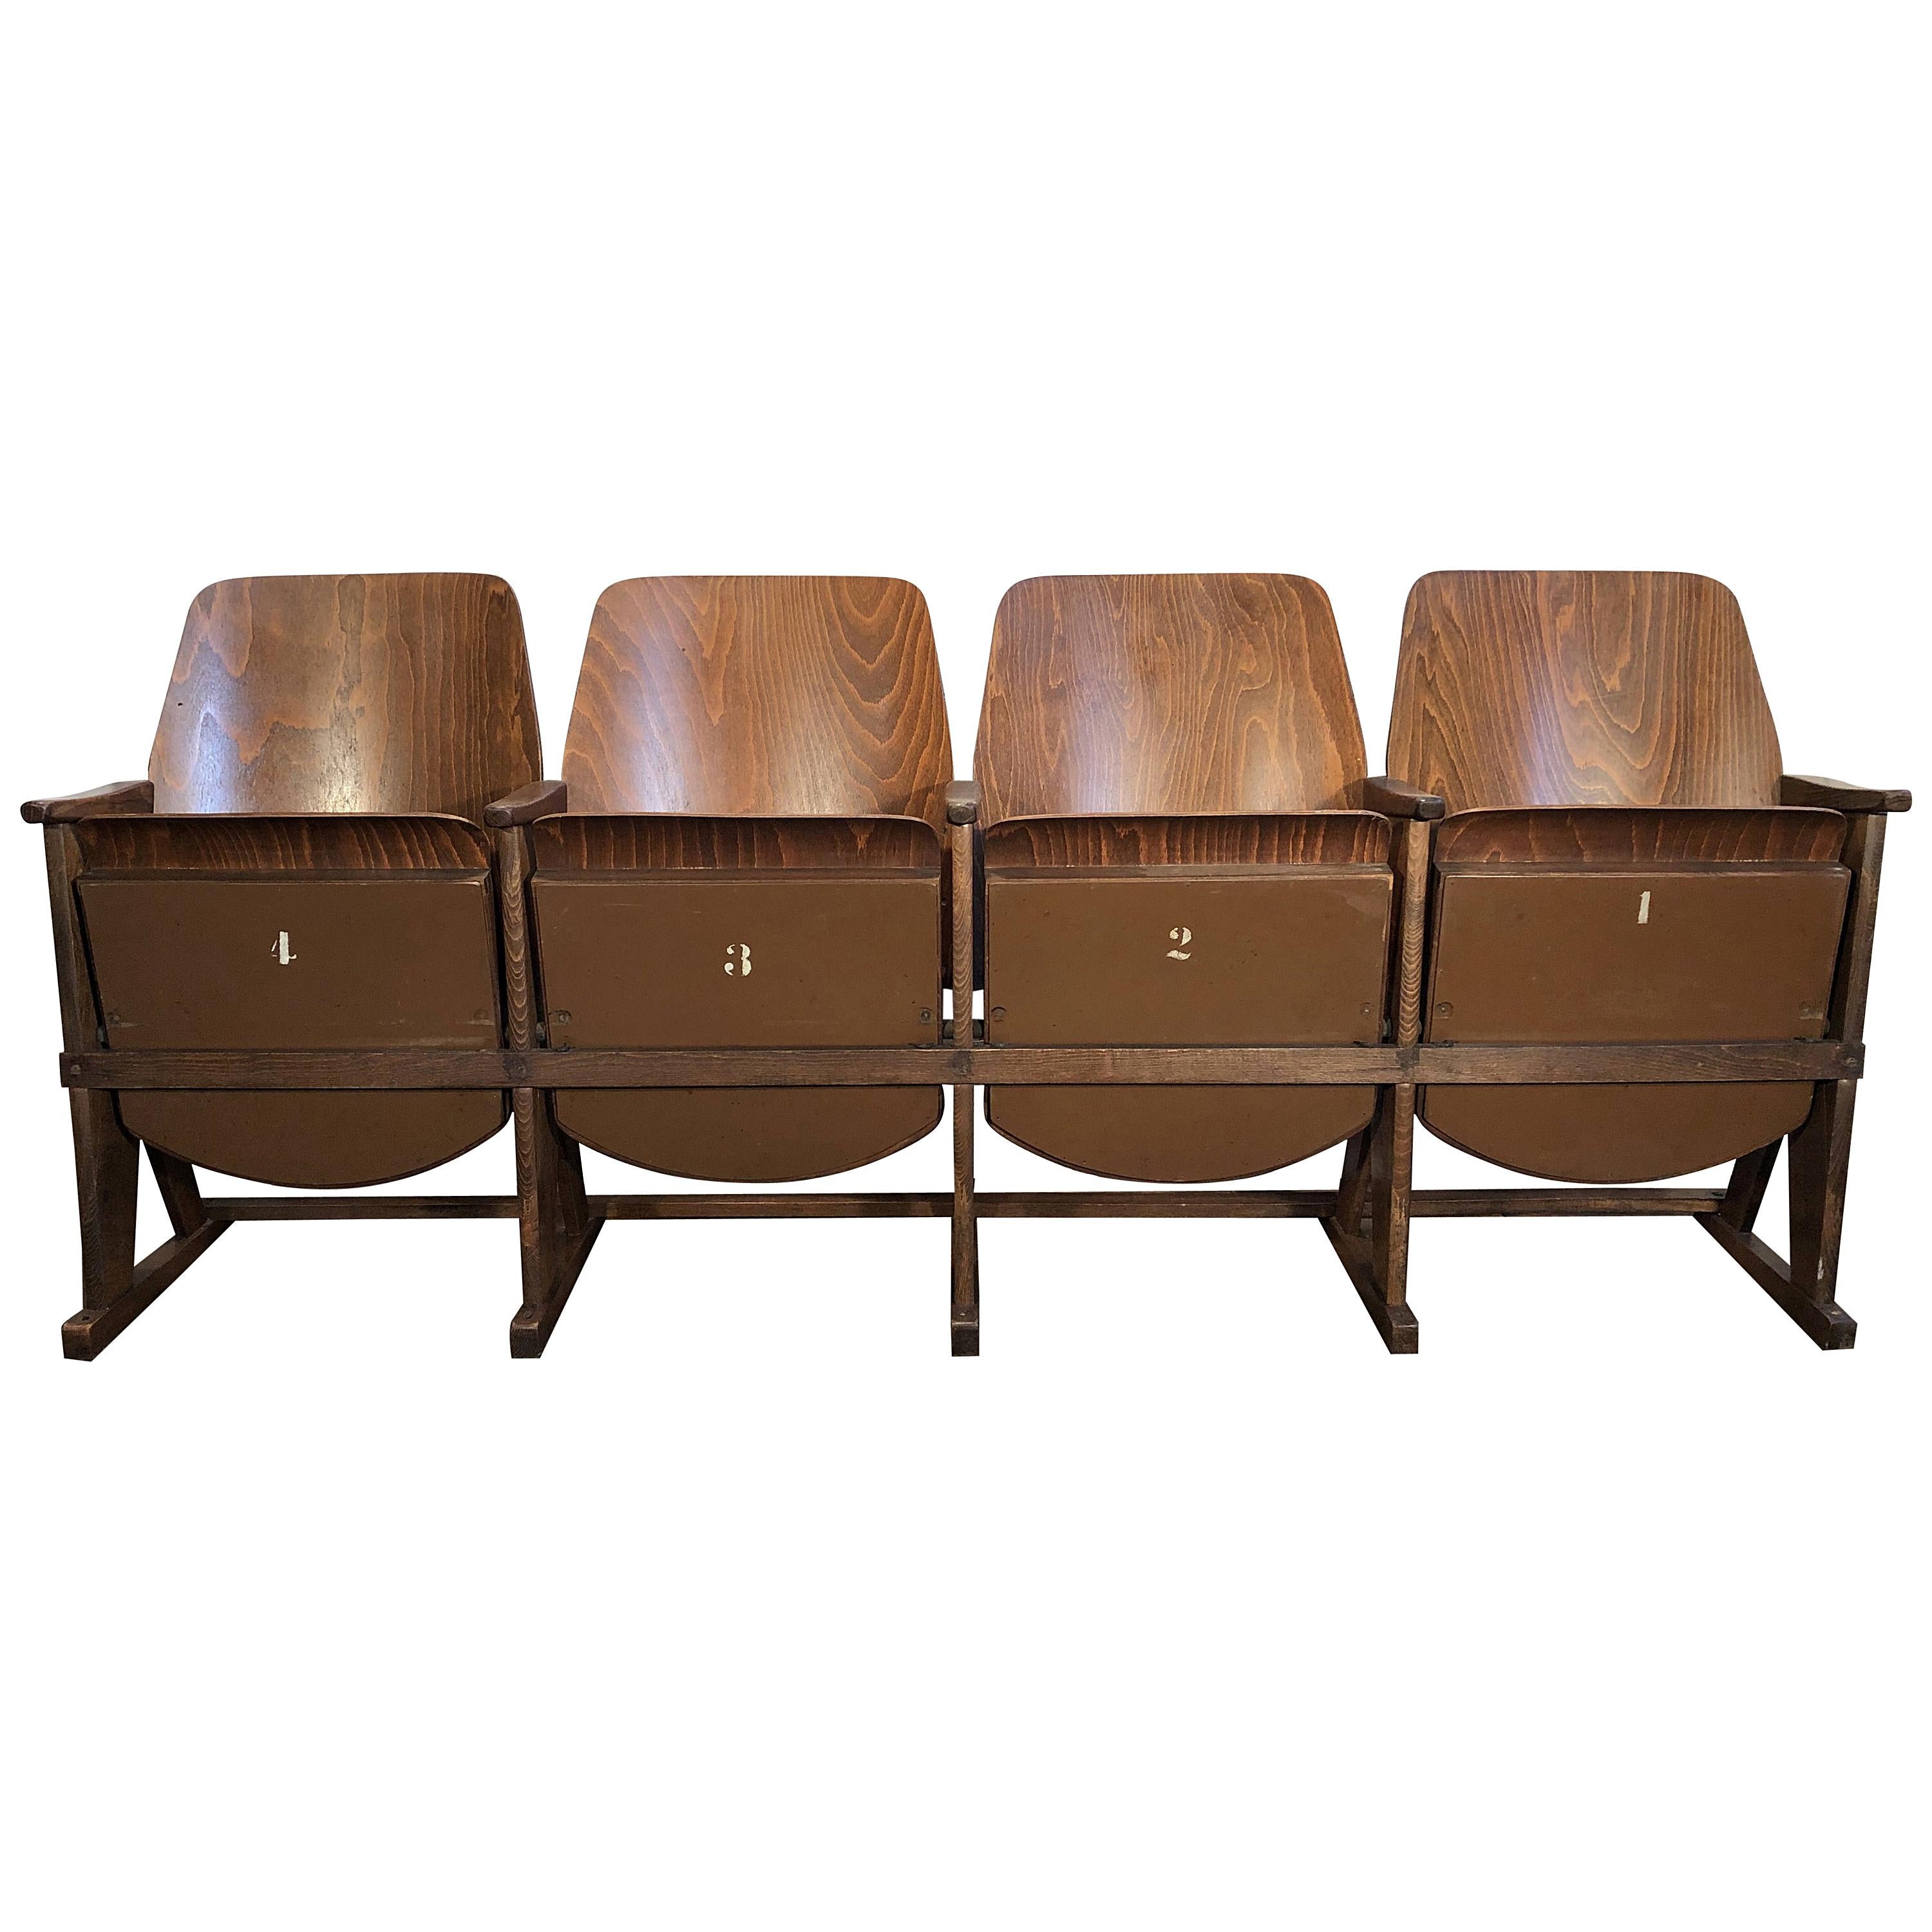 Vintage Four-Seat Cinema Bench from Ton, 1960s